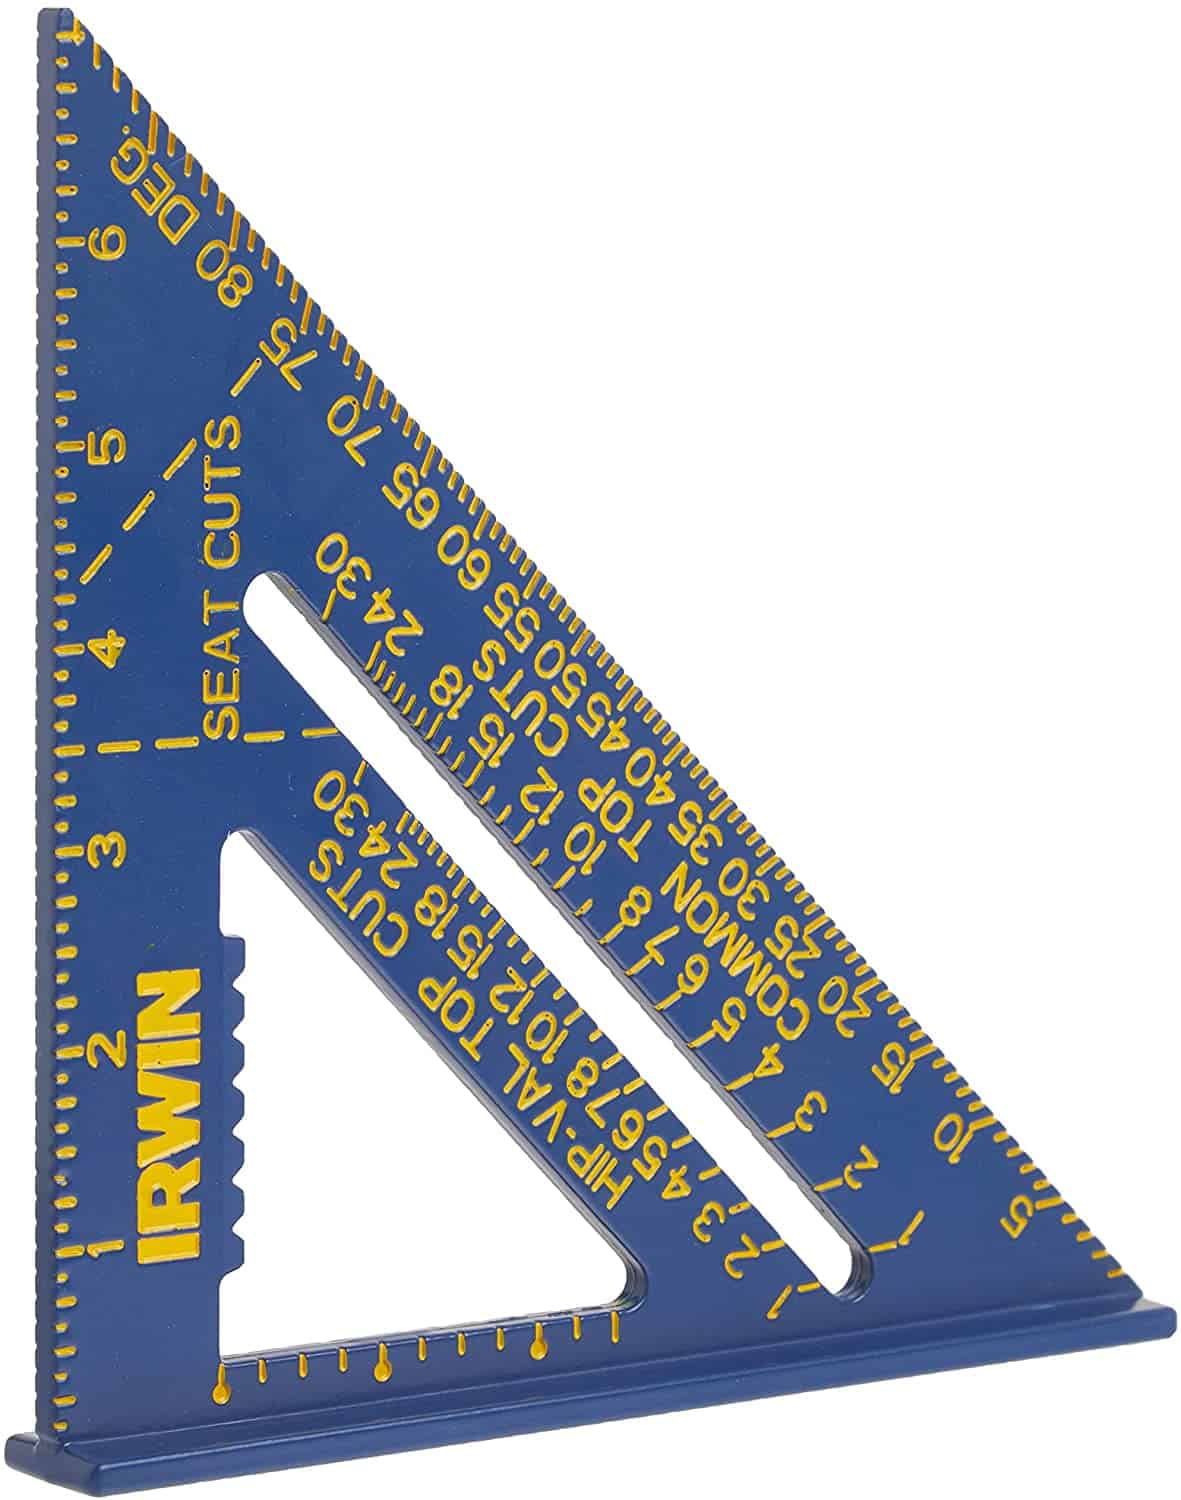 Best high contrast speed square- IRWIN Tools Rafter Square